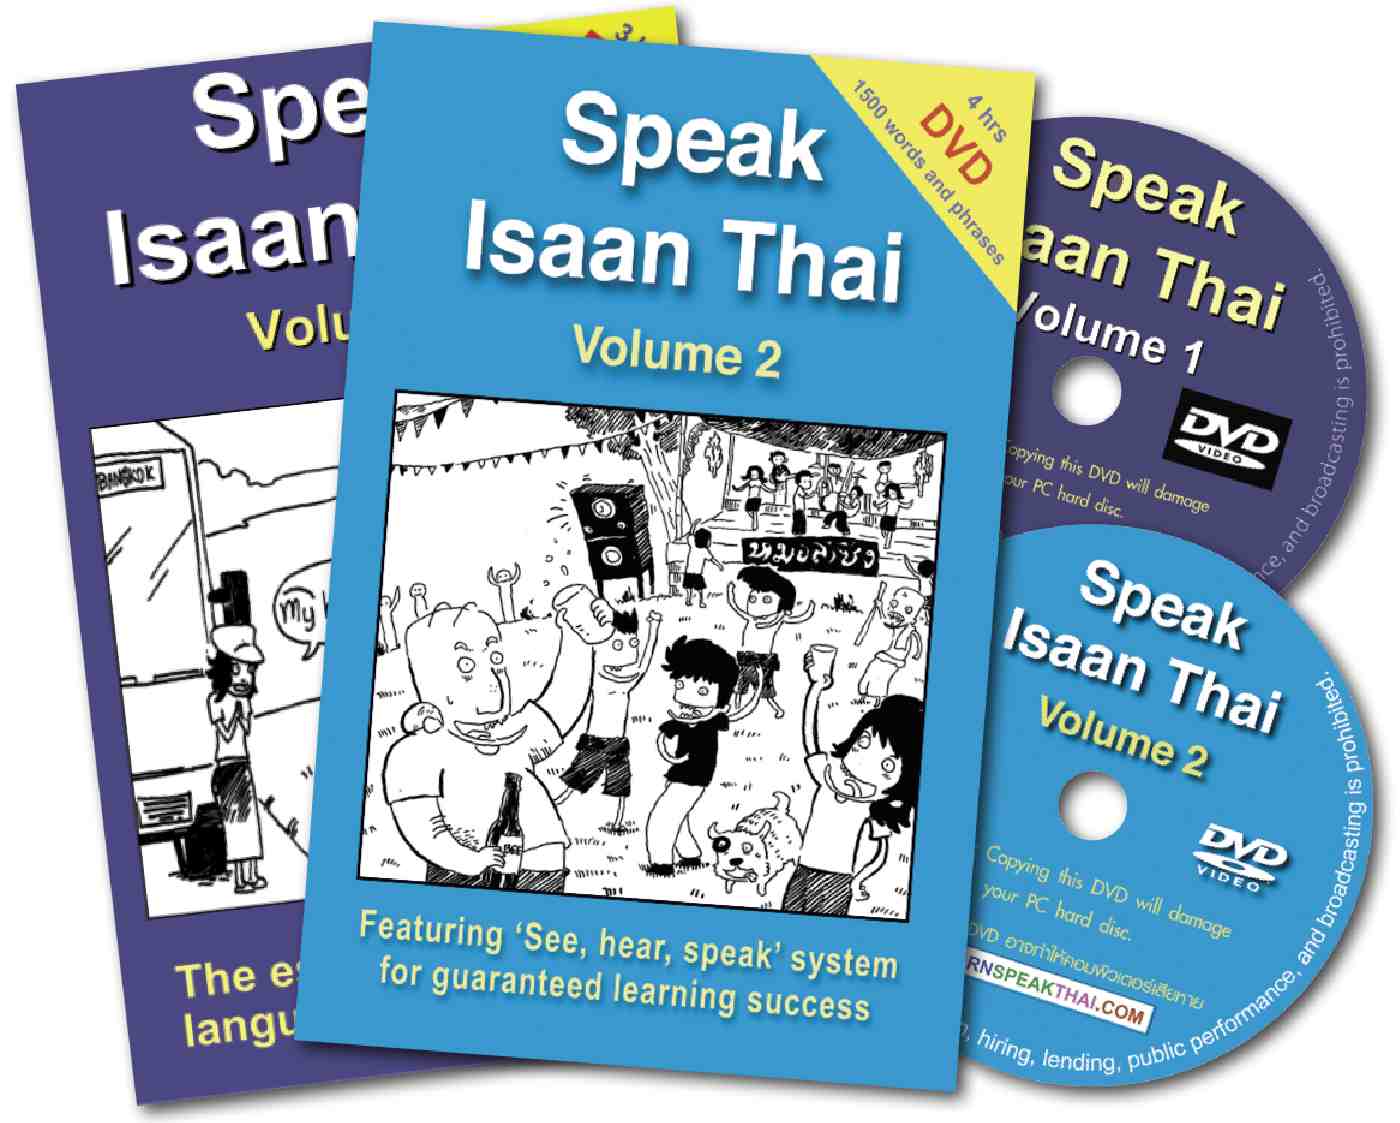 The Complete Speak Isaan Thai 1 and 2